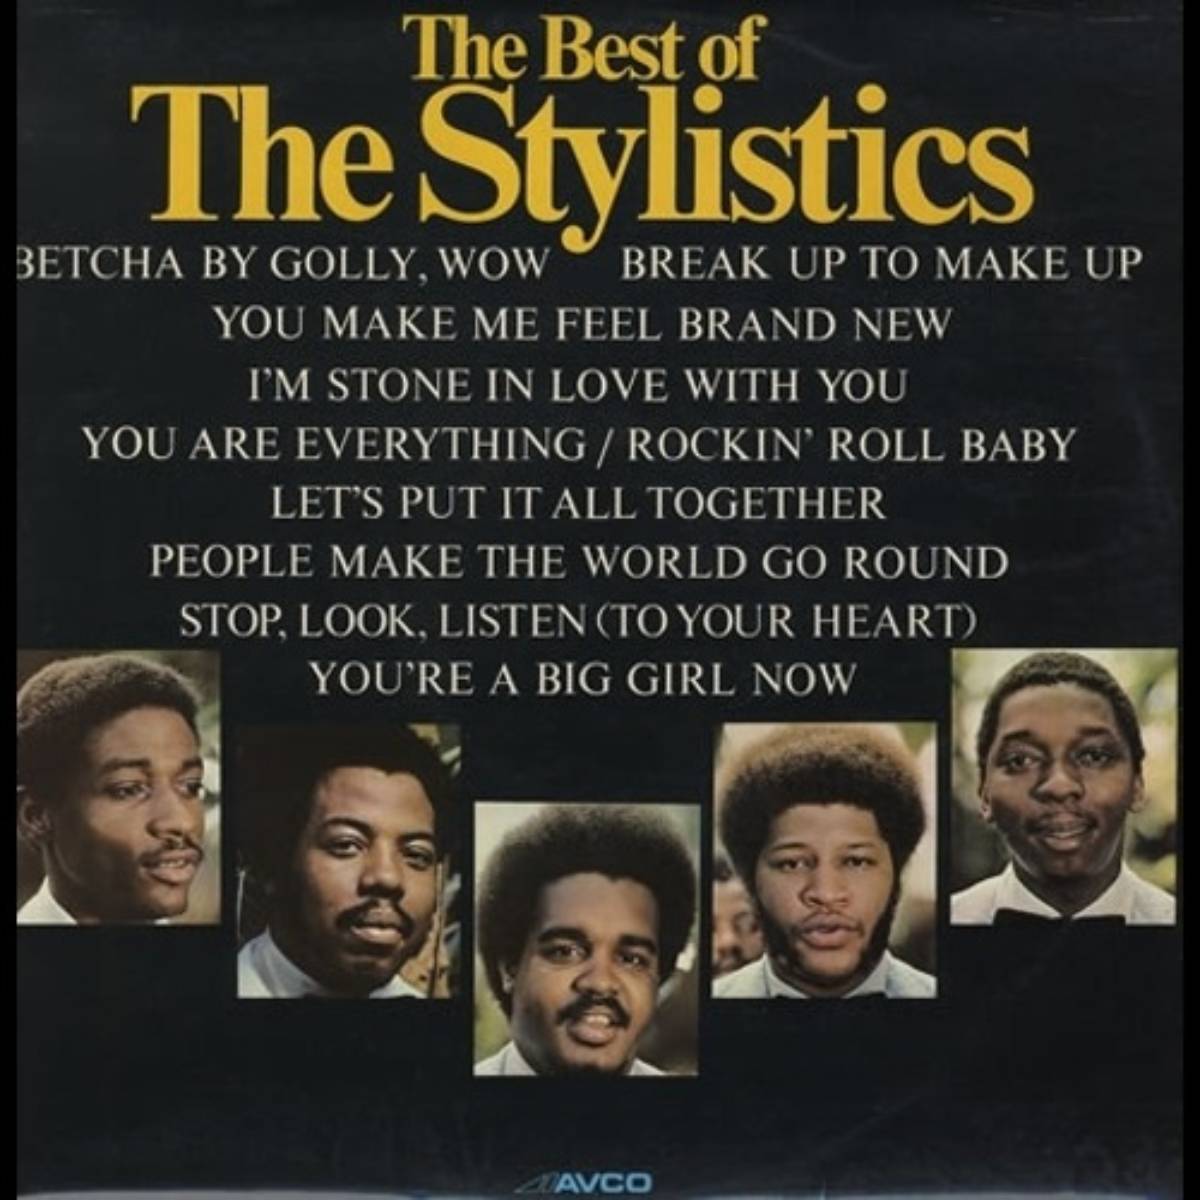 The Best Of The Stylistics (1975)